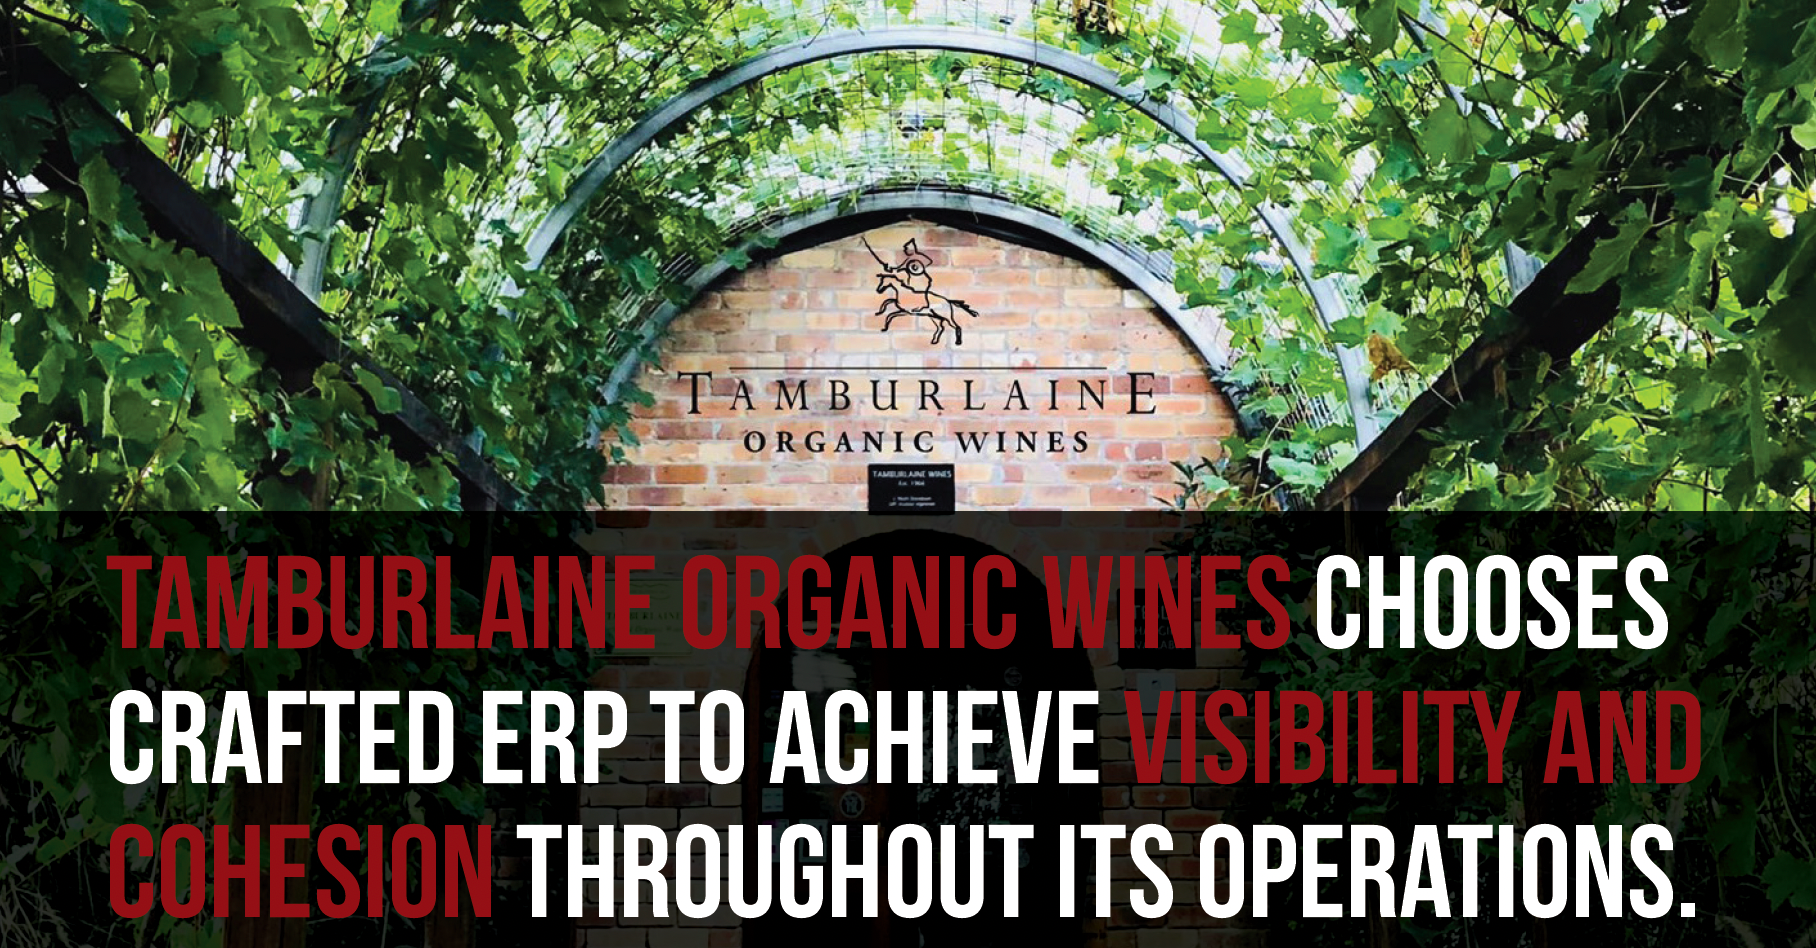 A sign that says tamburlaine organic wines chooses crafted erp to achieve visibility and cohesion throughout its operations